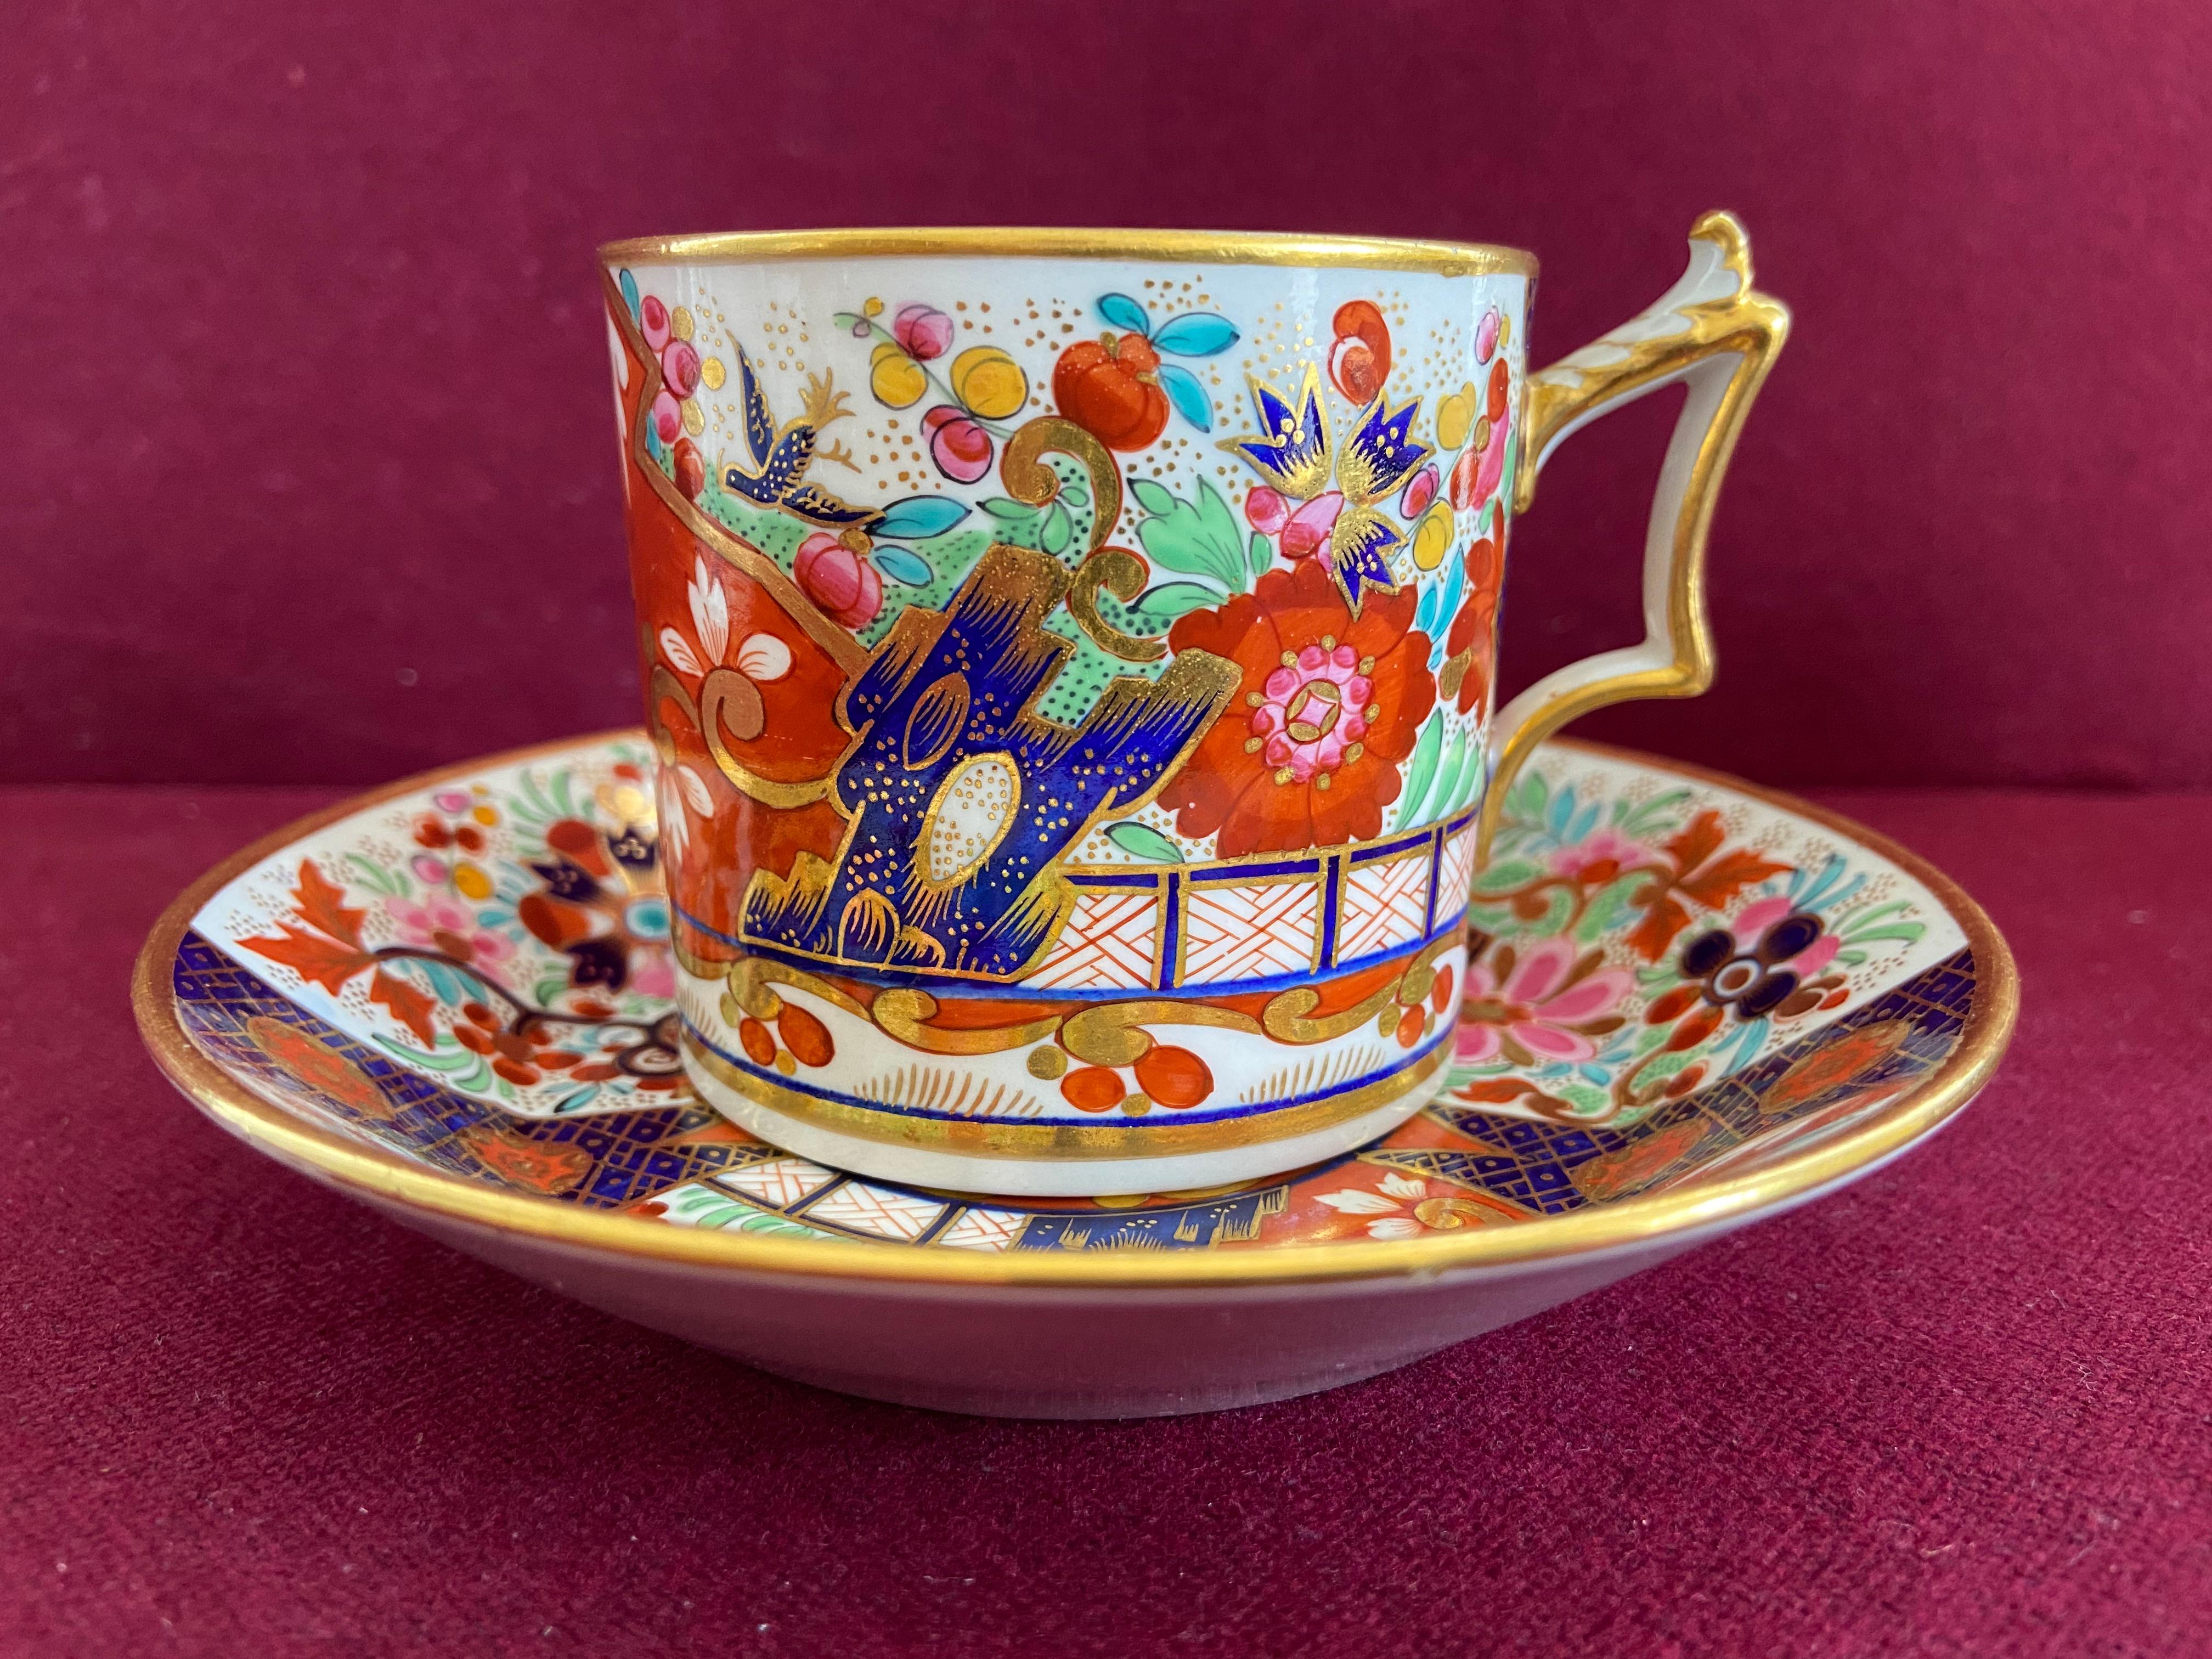 A Flight Barr and Barr Worcester Porcelain Coffee Cans and Saucer c.1815-1820. Finely decorated with a bold Japan pattern.

Condition: Excellent 